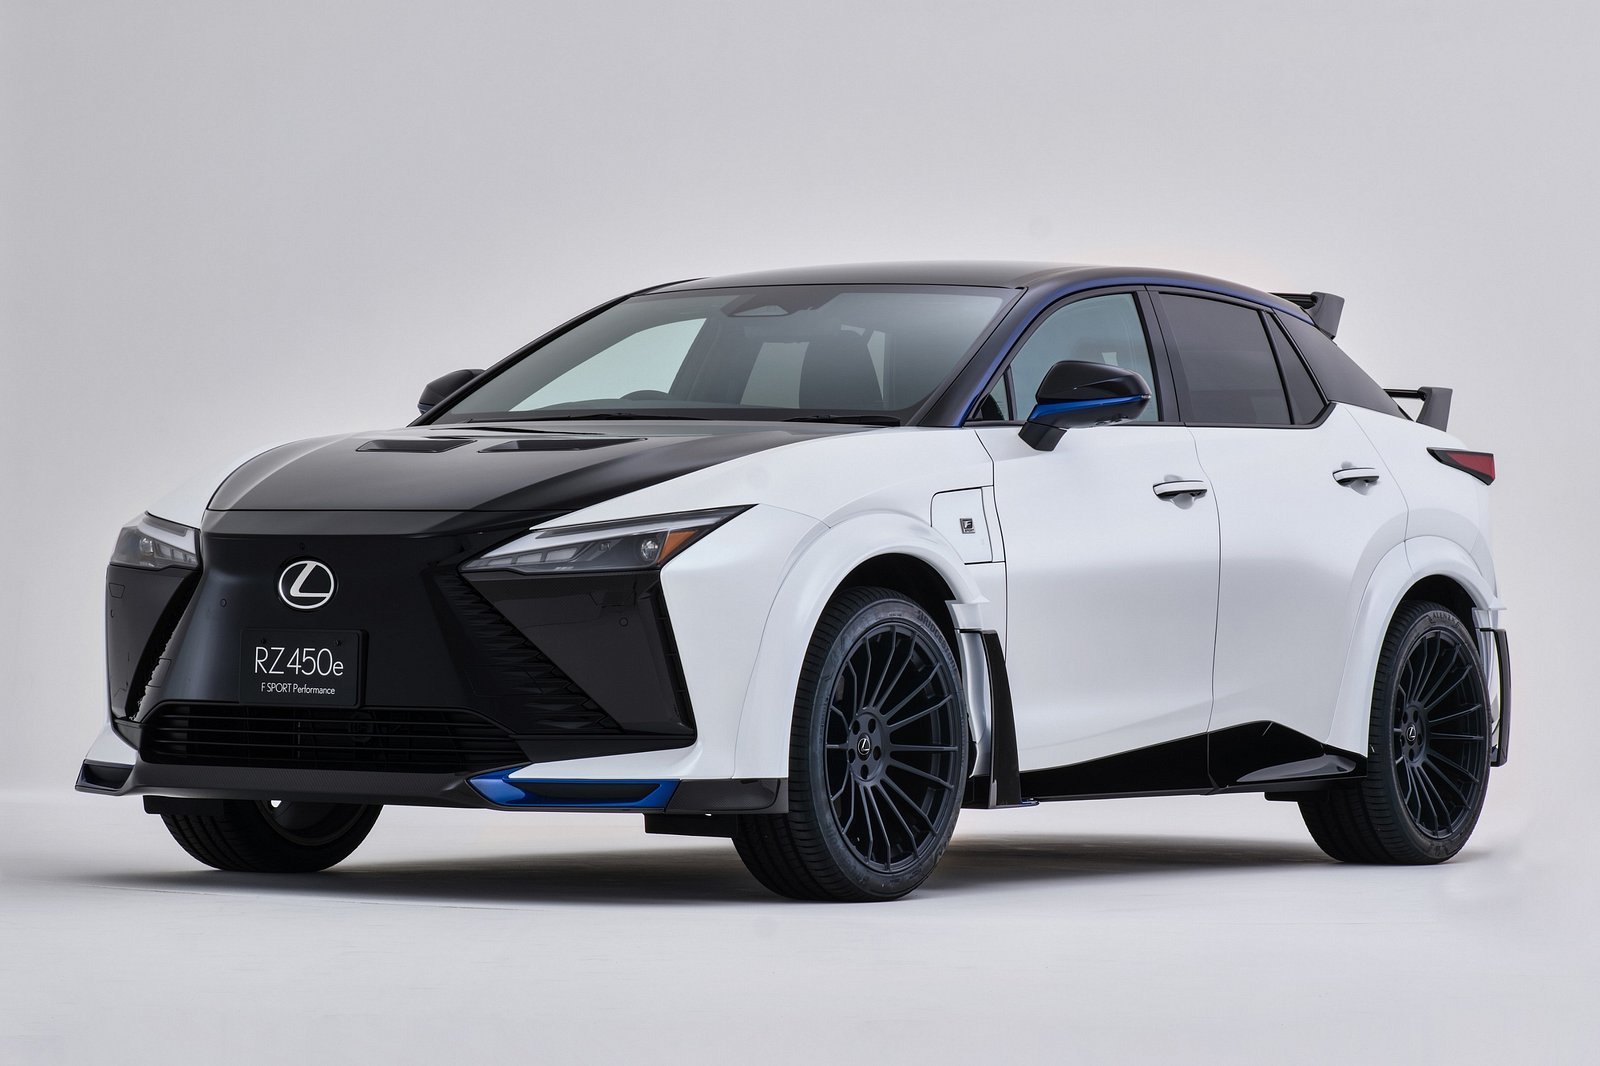 Lexus Planning to Introduce All-New RZ F High-Performance EV